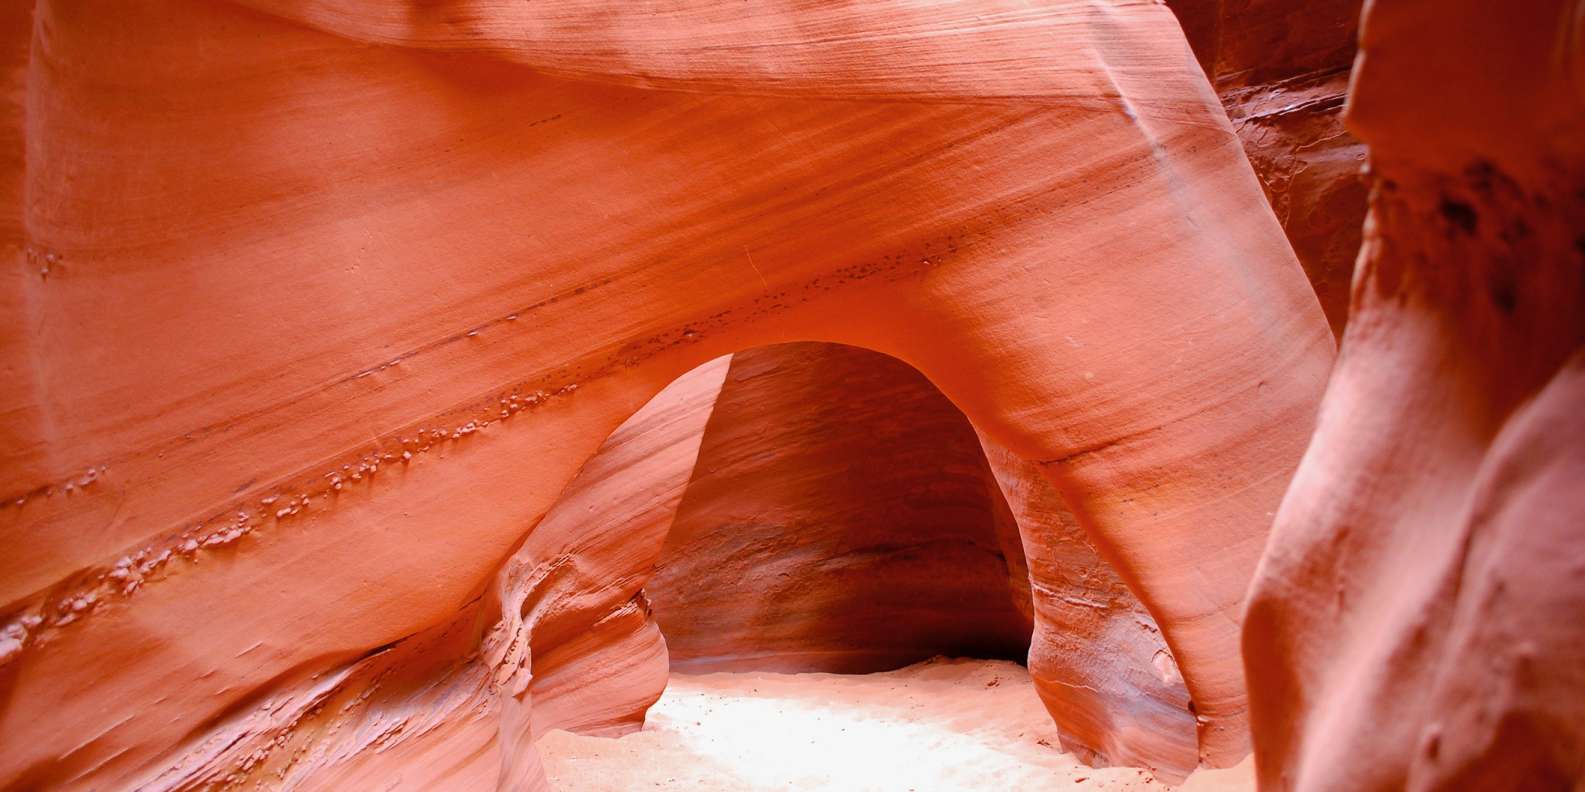 The BEST Red Canyon Slot, Utah Water sports 2023 FREE Cancellation